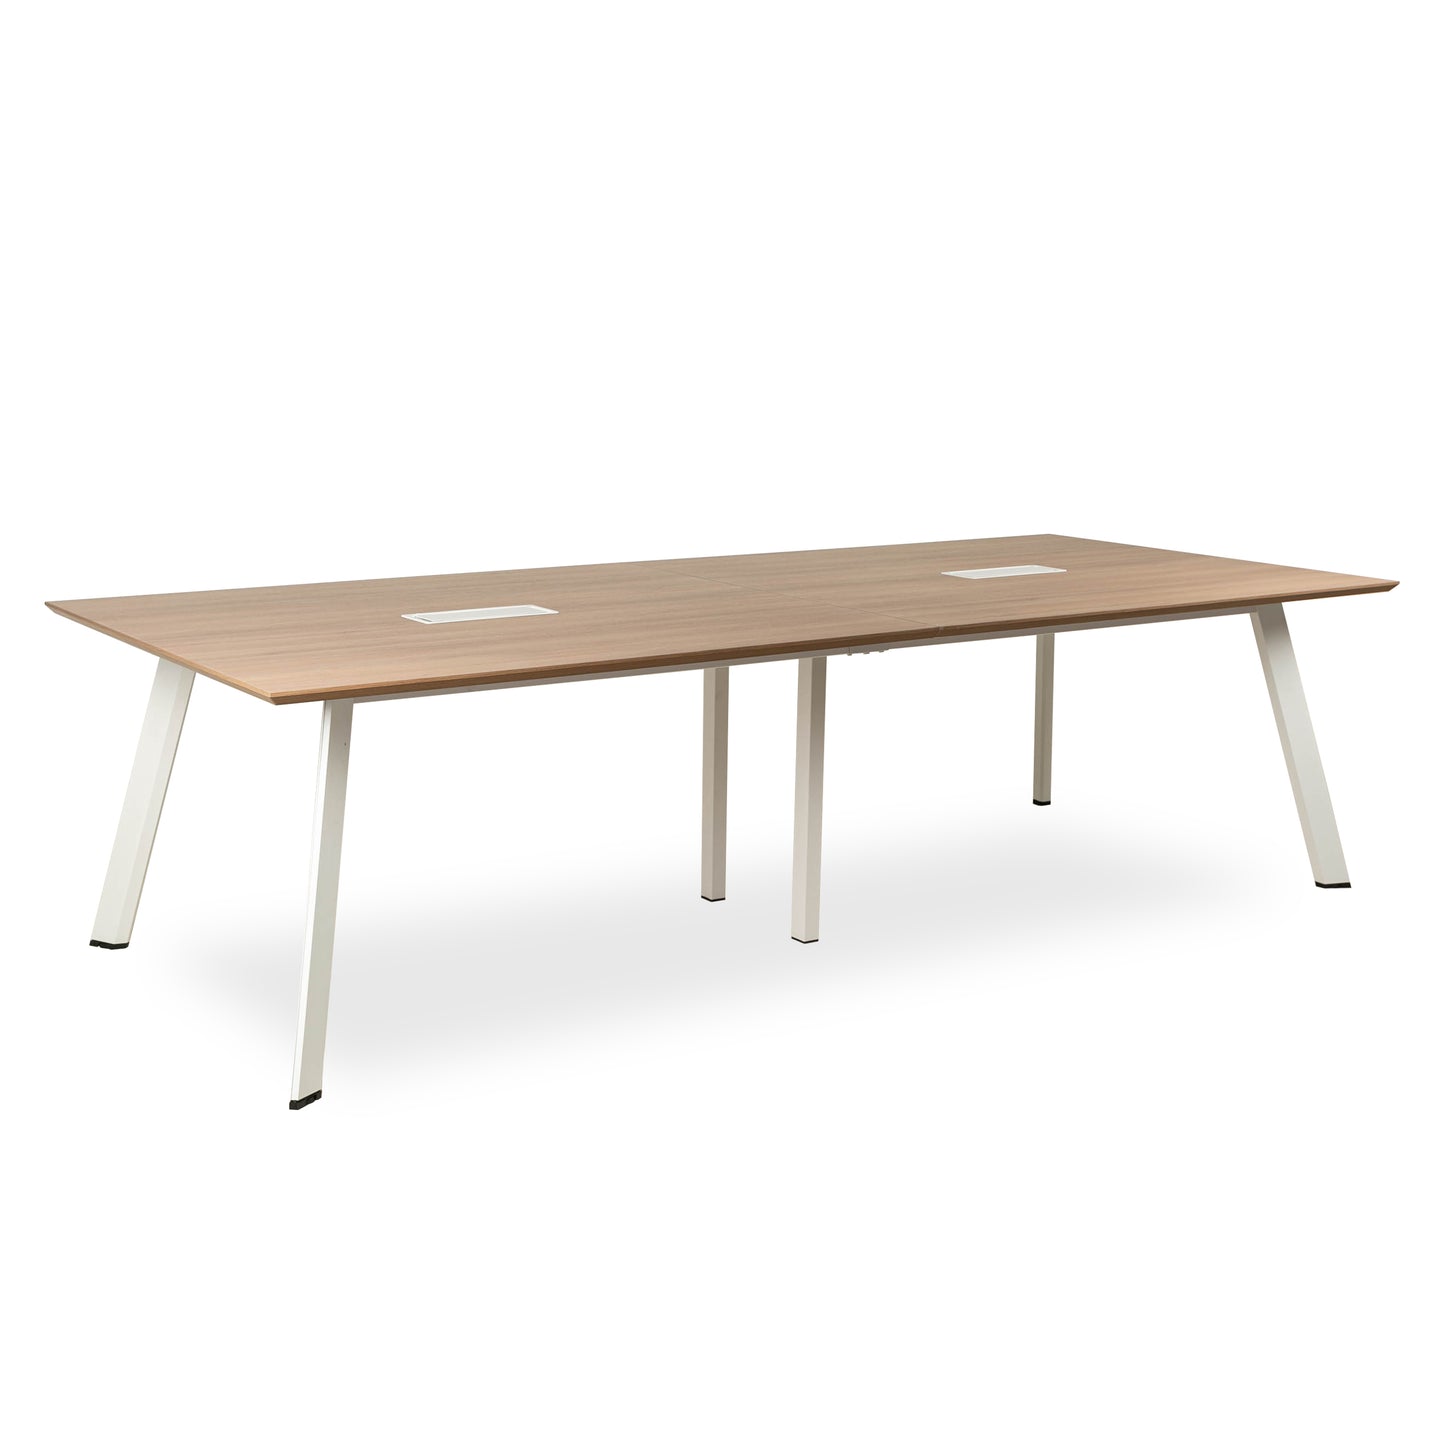 A28 MEETING TABLE - ContractWorld Furniture